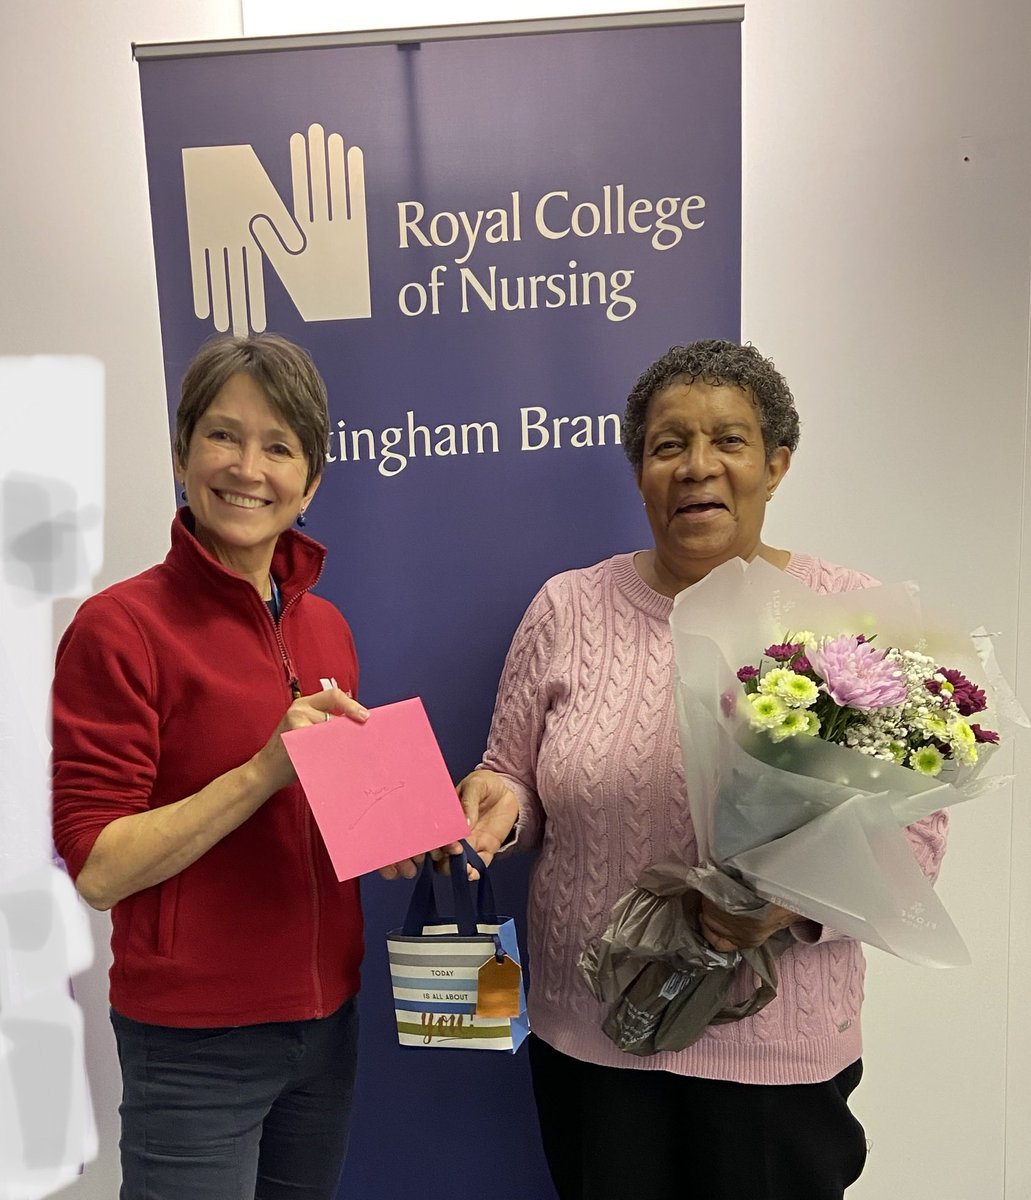 Congratulations Maive Coley on being voted RCN Representative of the Year 💐… so richly deserved 💗🎉 ⁦@MaiveColey1⁩ ⁦@RCNNottingham⁩ ⁦@RCNEastMids⁩ ⁦@RCNNSW2021⁩ ⁦@OfrahRn⁩ ⁦@theRCN⁩ #RCNCongress2023